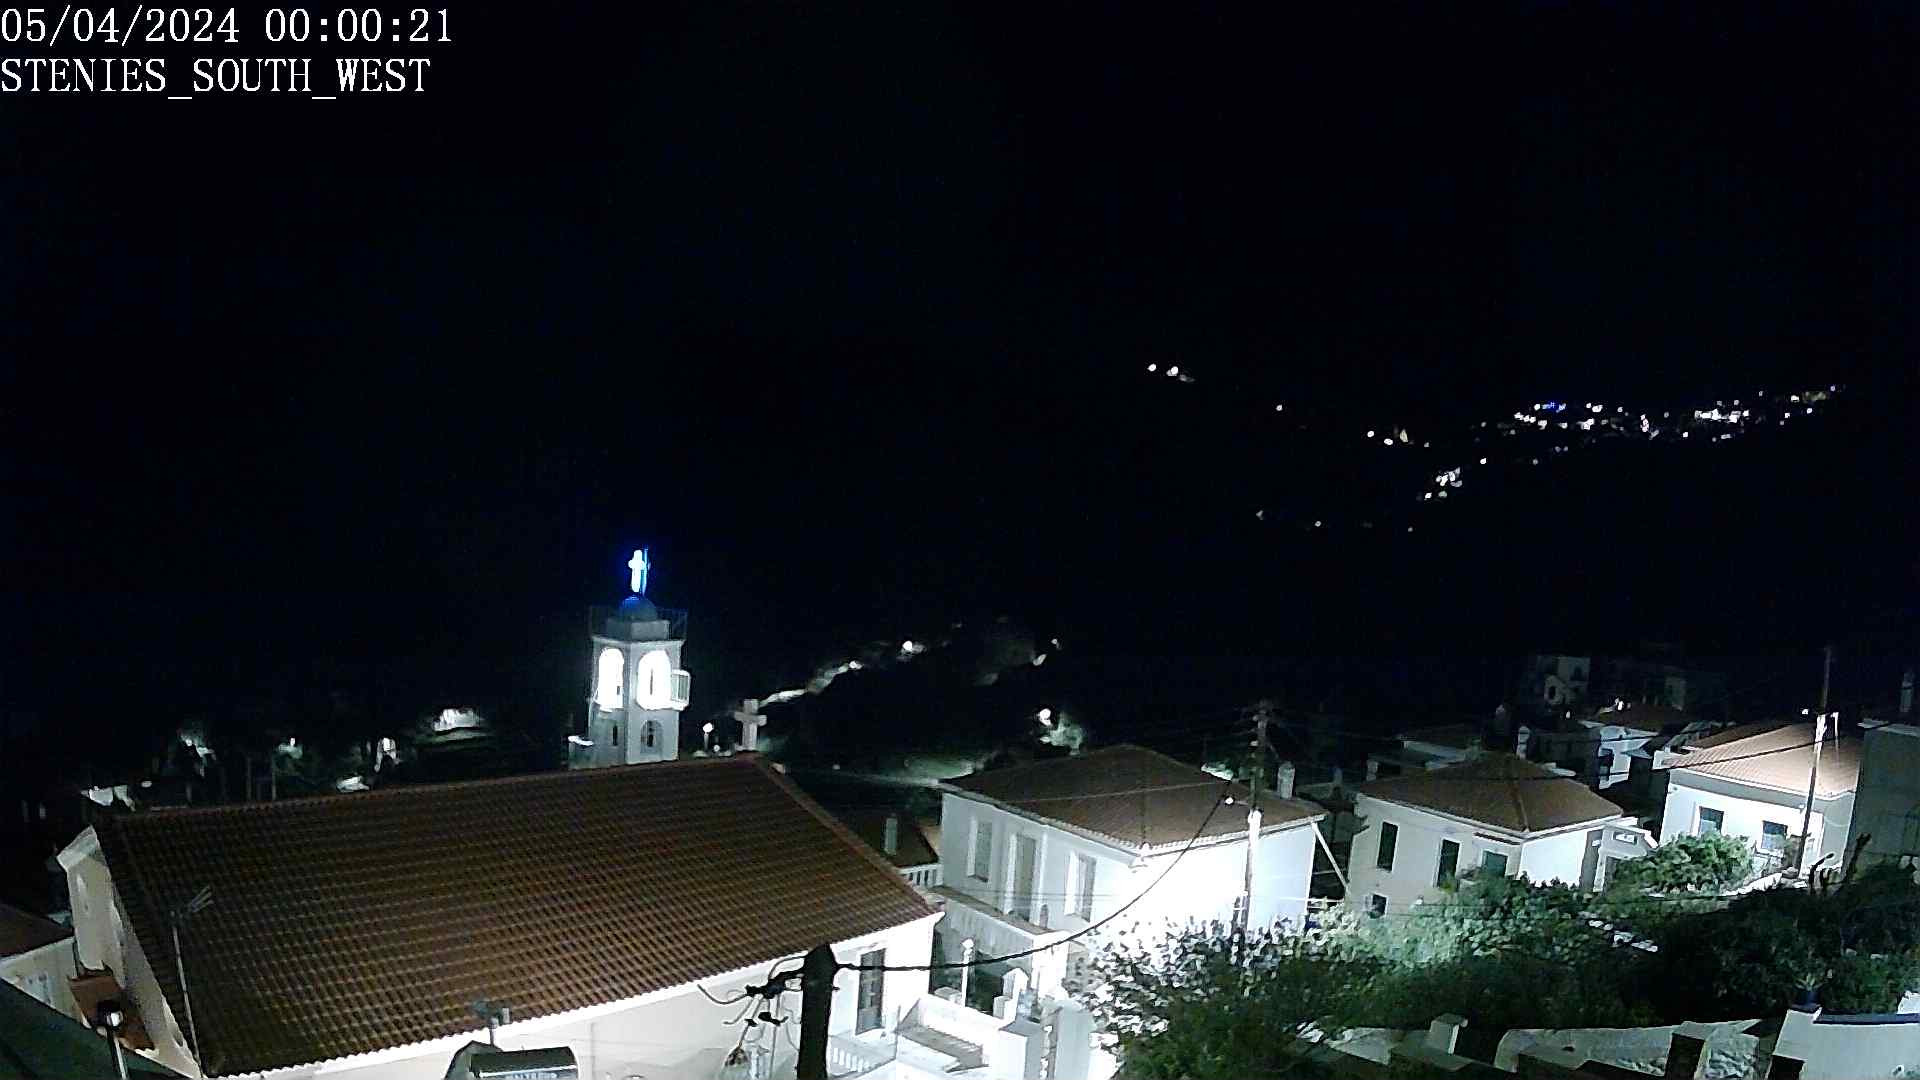 time-lapse frame, Stenies. Andros Island  SW View webcam